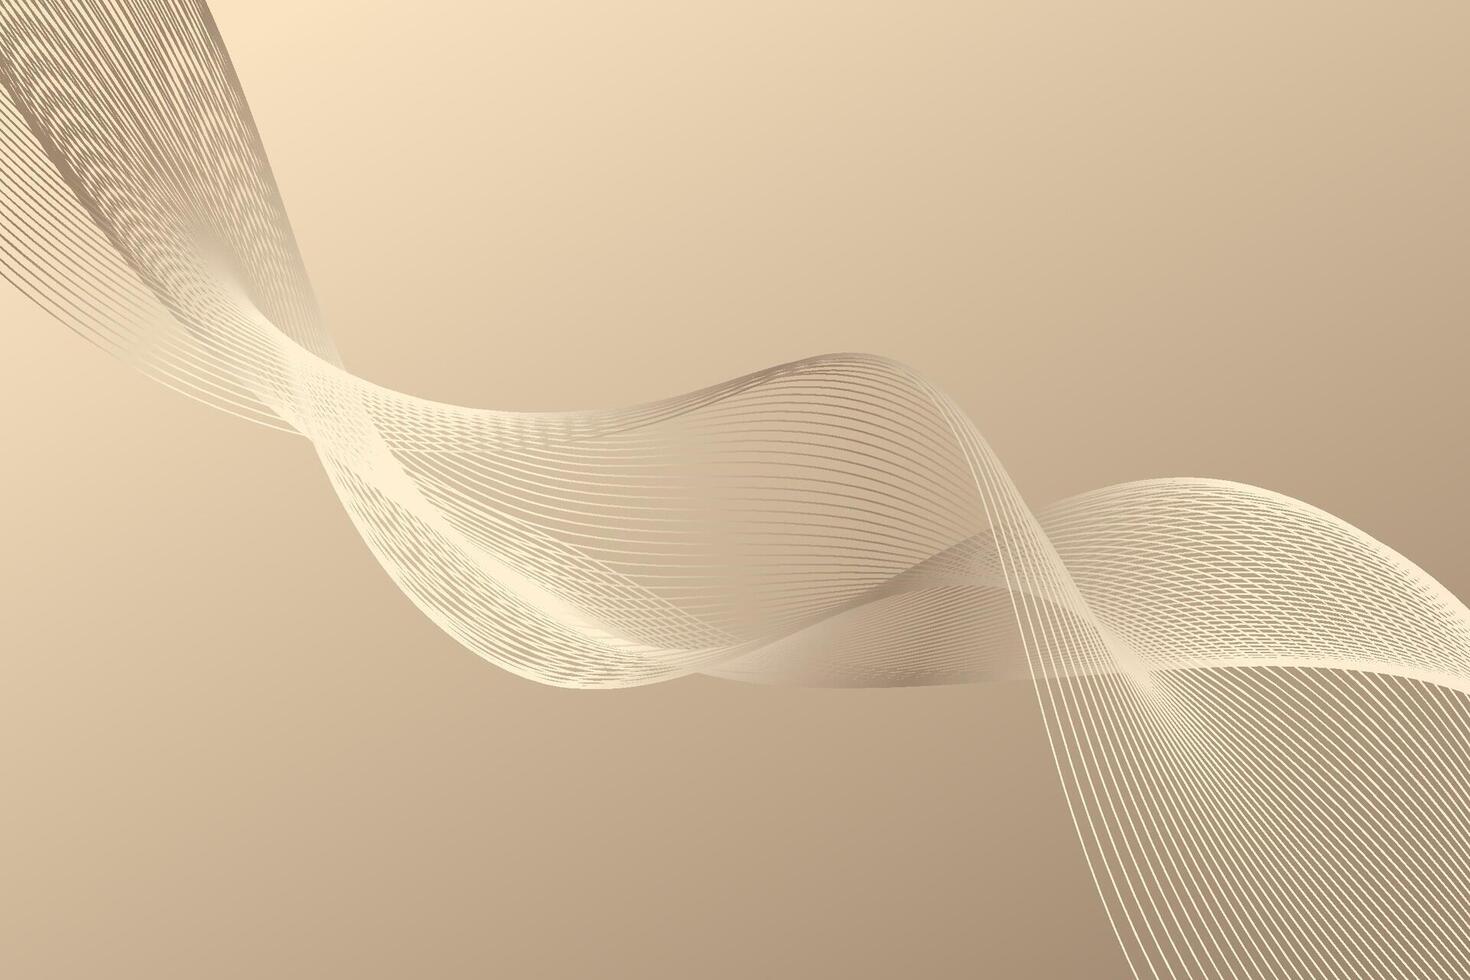 A luxurious and elegant vector backdrop with glowing golden lines forming a smooth, wavy network with a subtle gradient